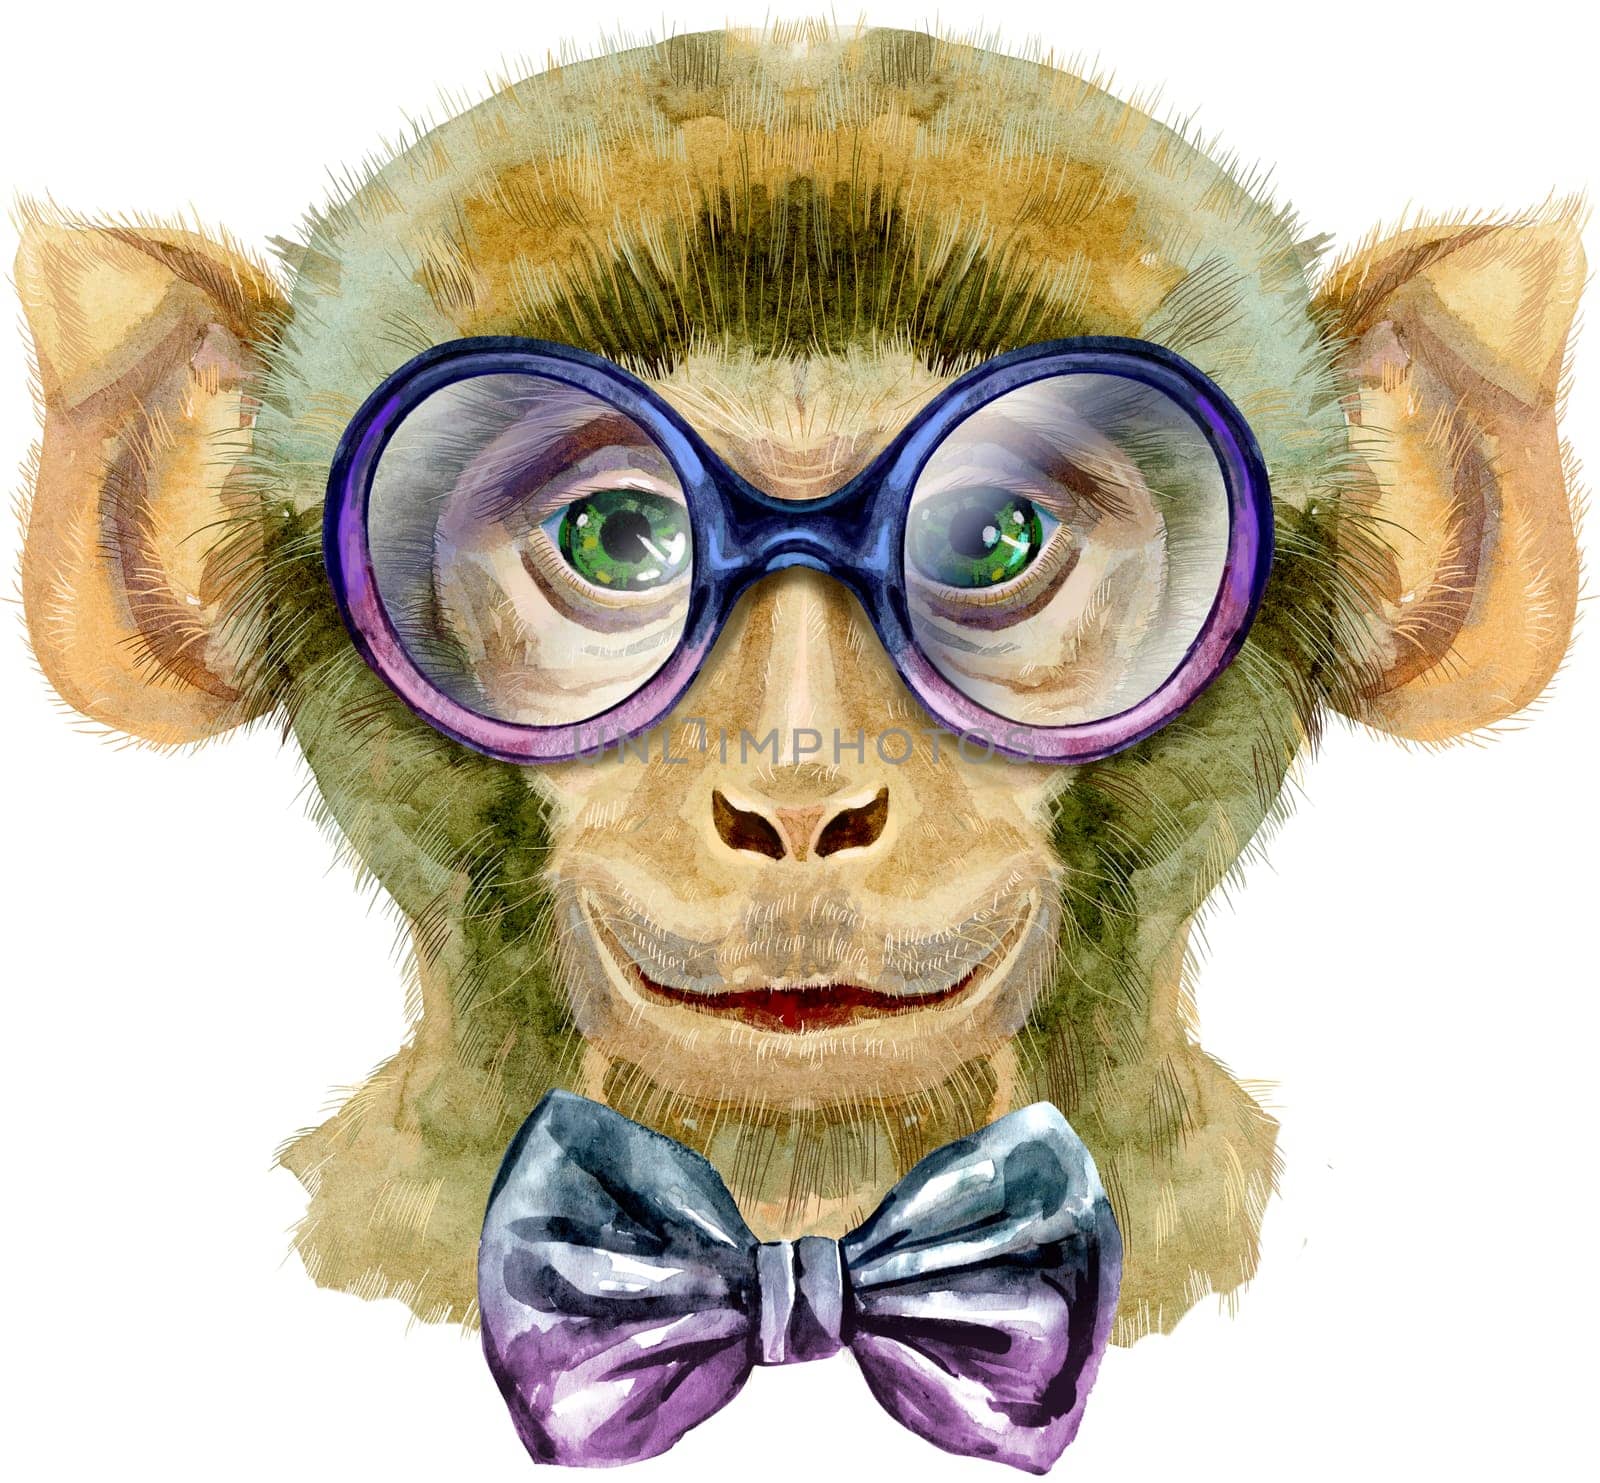 Monkey head in glasses isolated on white background. Monkey watercolor illustration